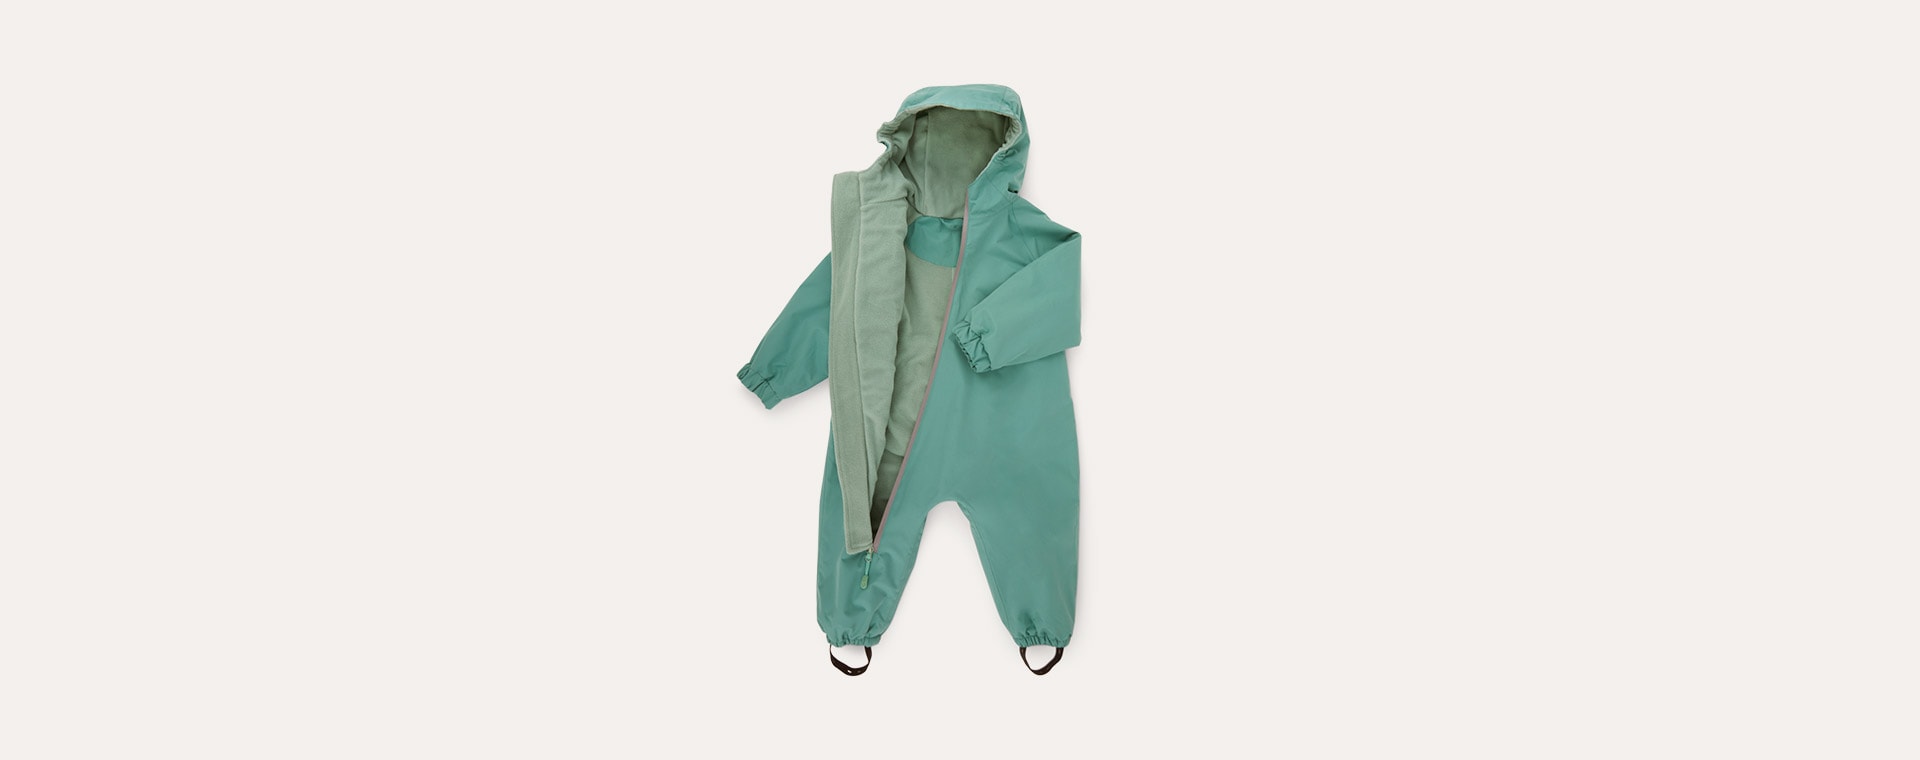 Pine KIDLY Label Fleece Lined Puddle Suit